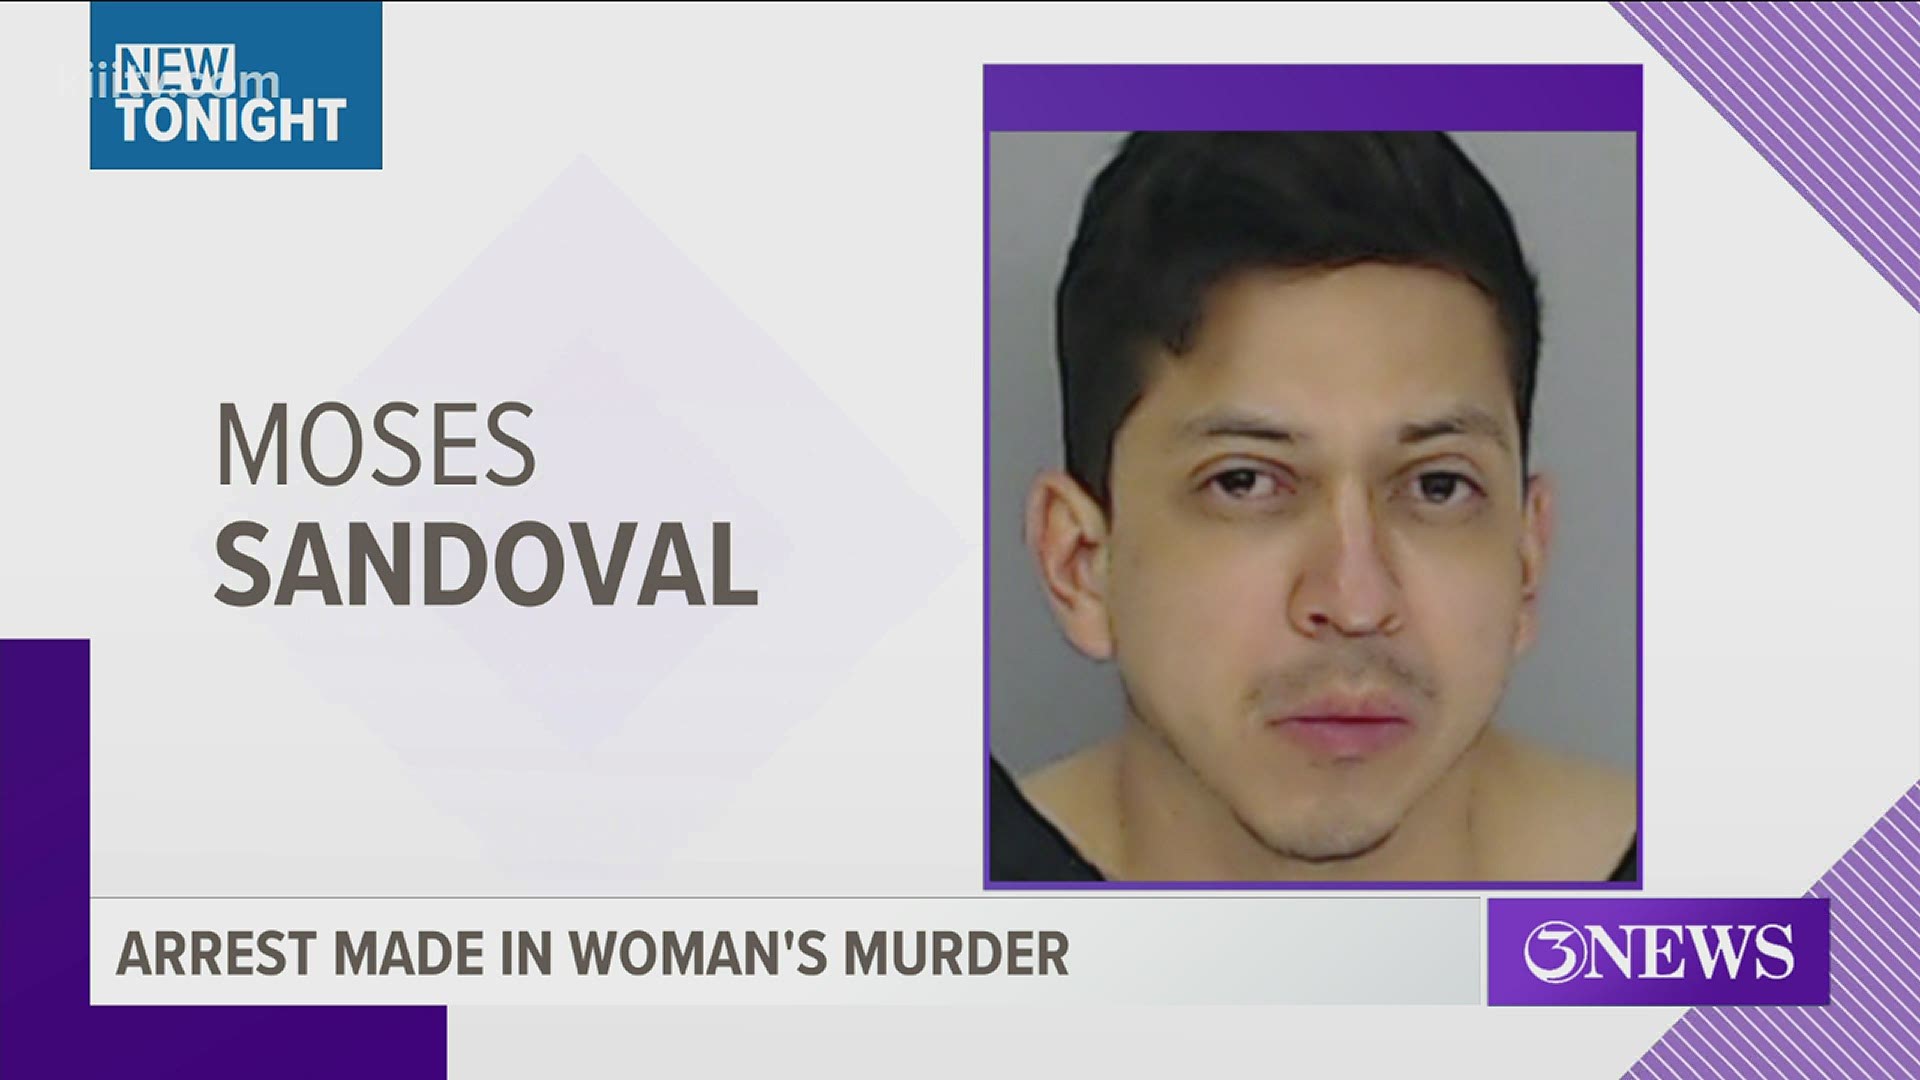 Moses Sandoval, 30, was arrested and charged with murder.